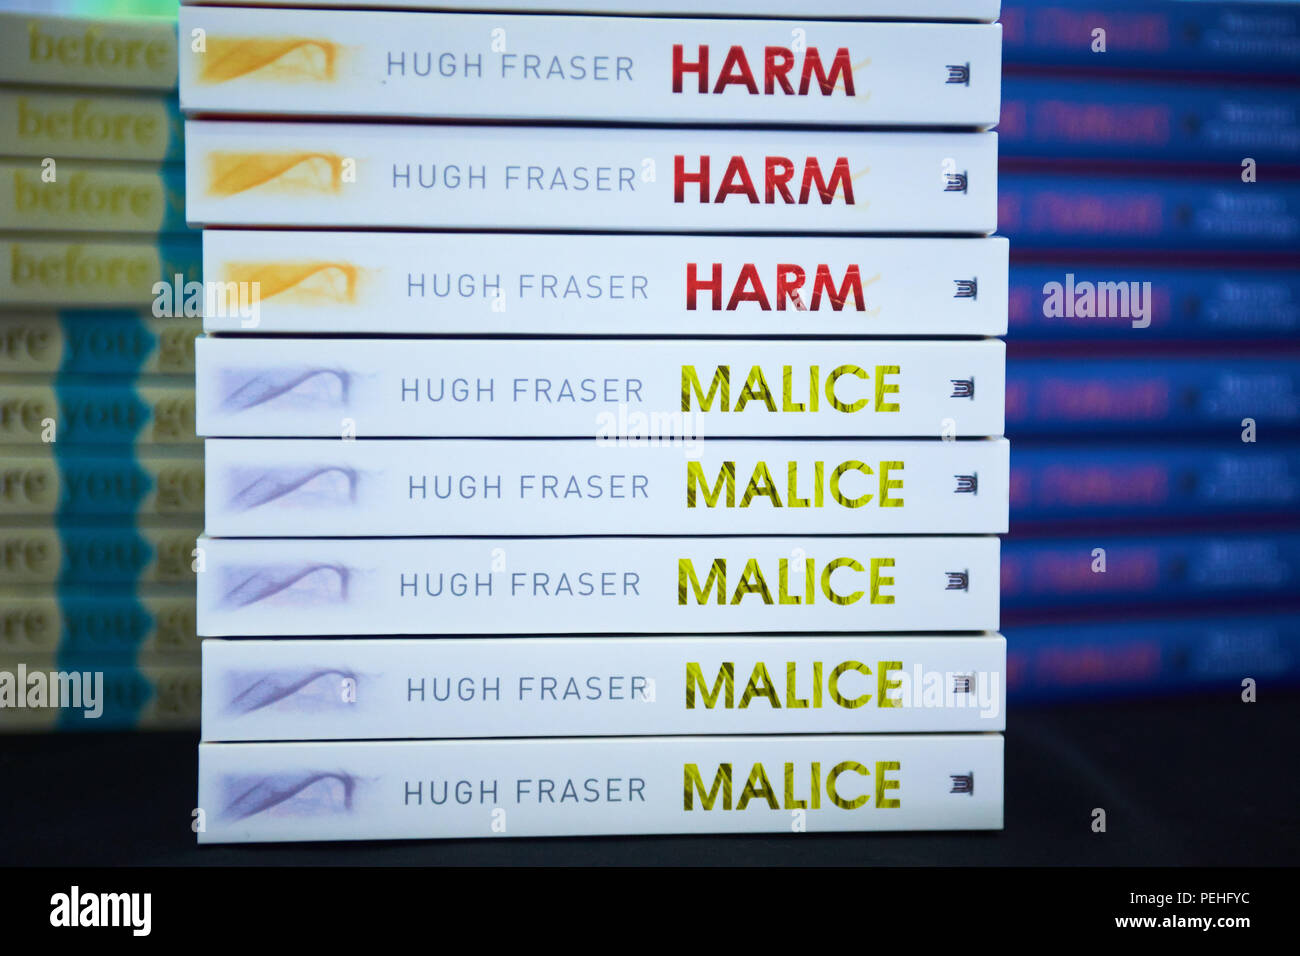 A stack of books showing spines with the titles “Harm” and “Malice” by Hugh  Fraser Stock Photo - Alamy